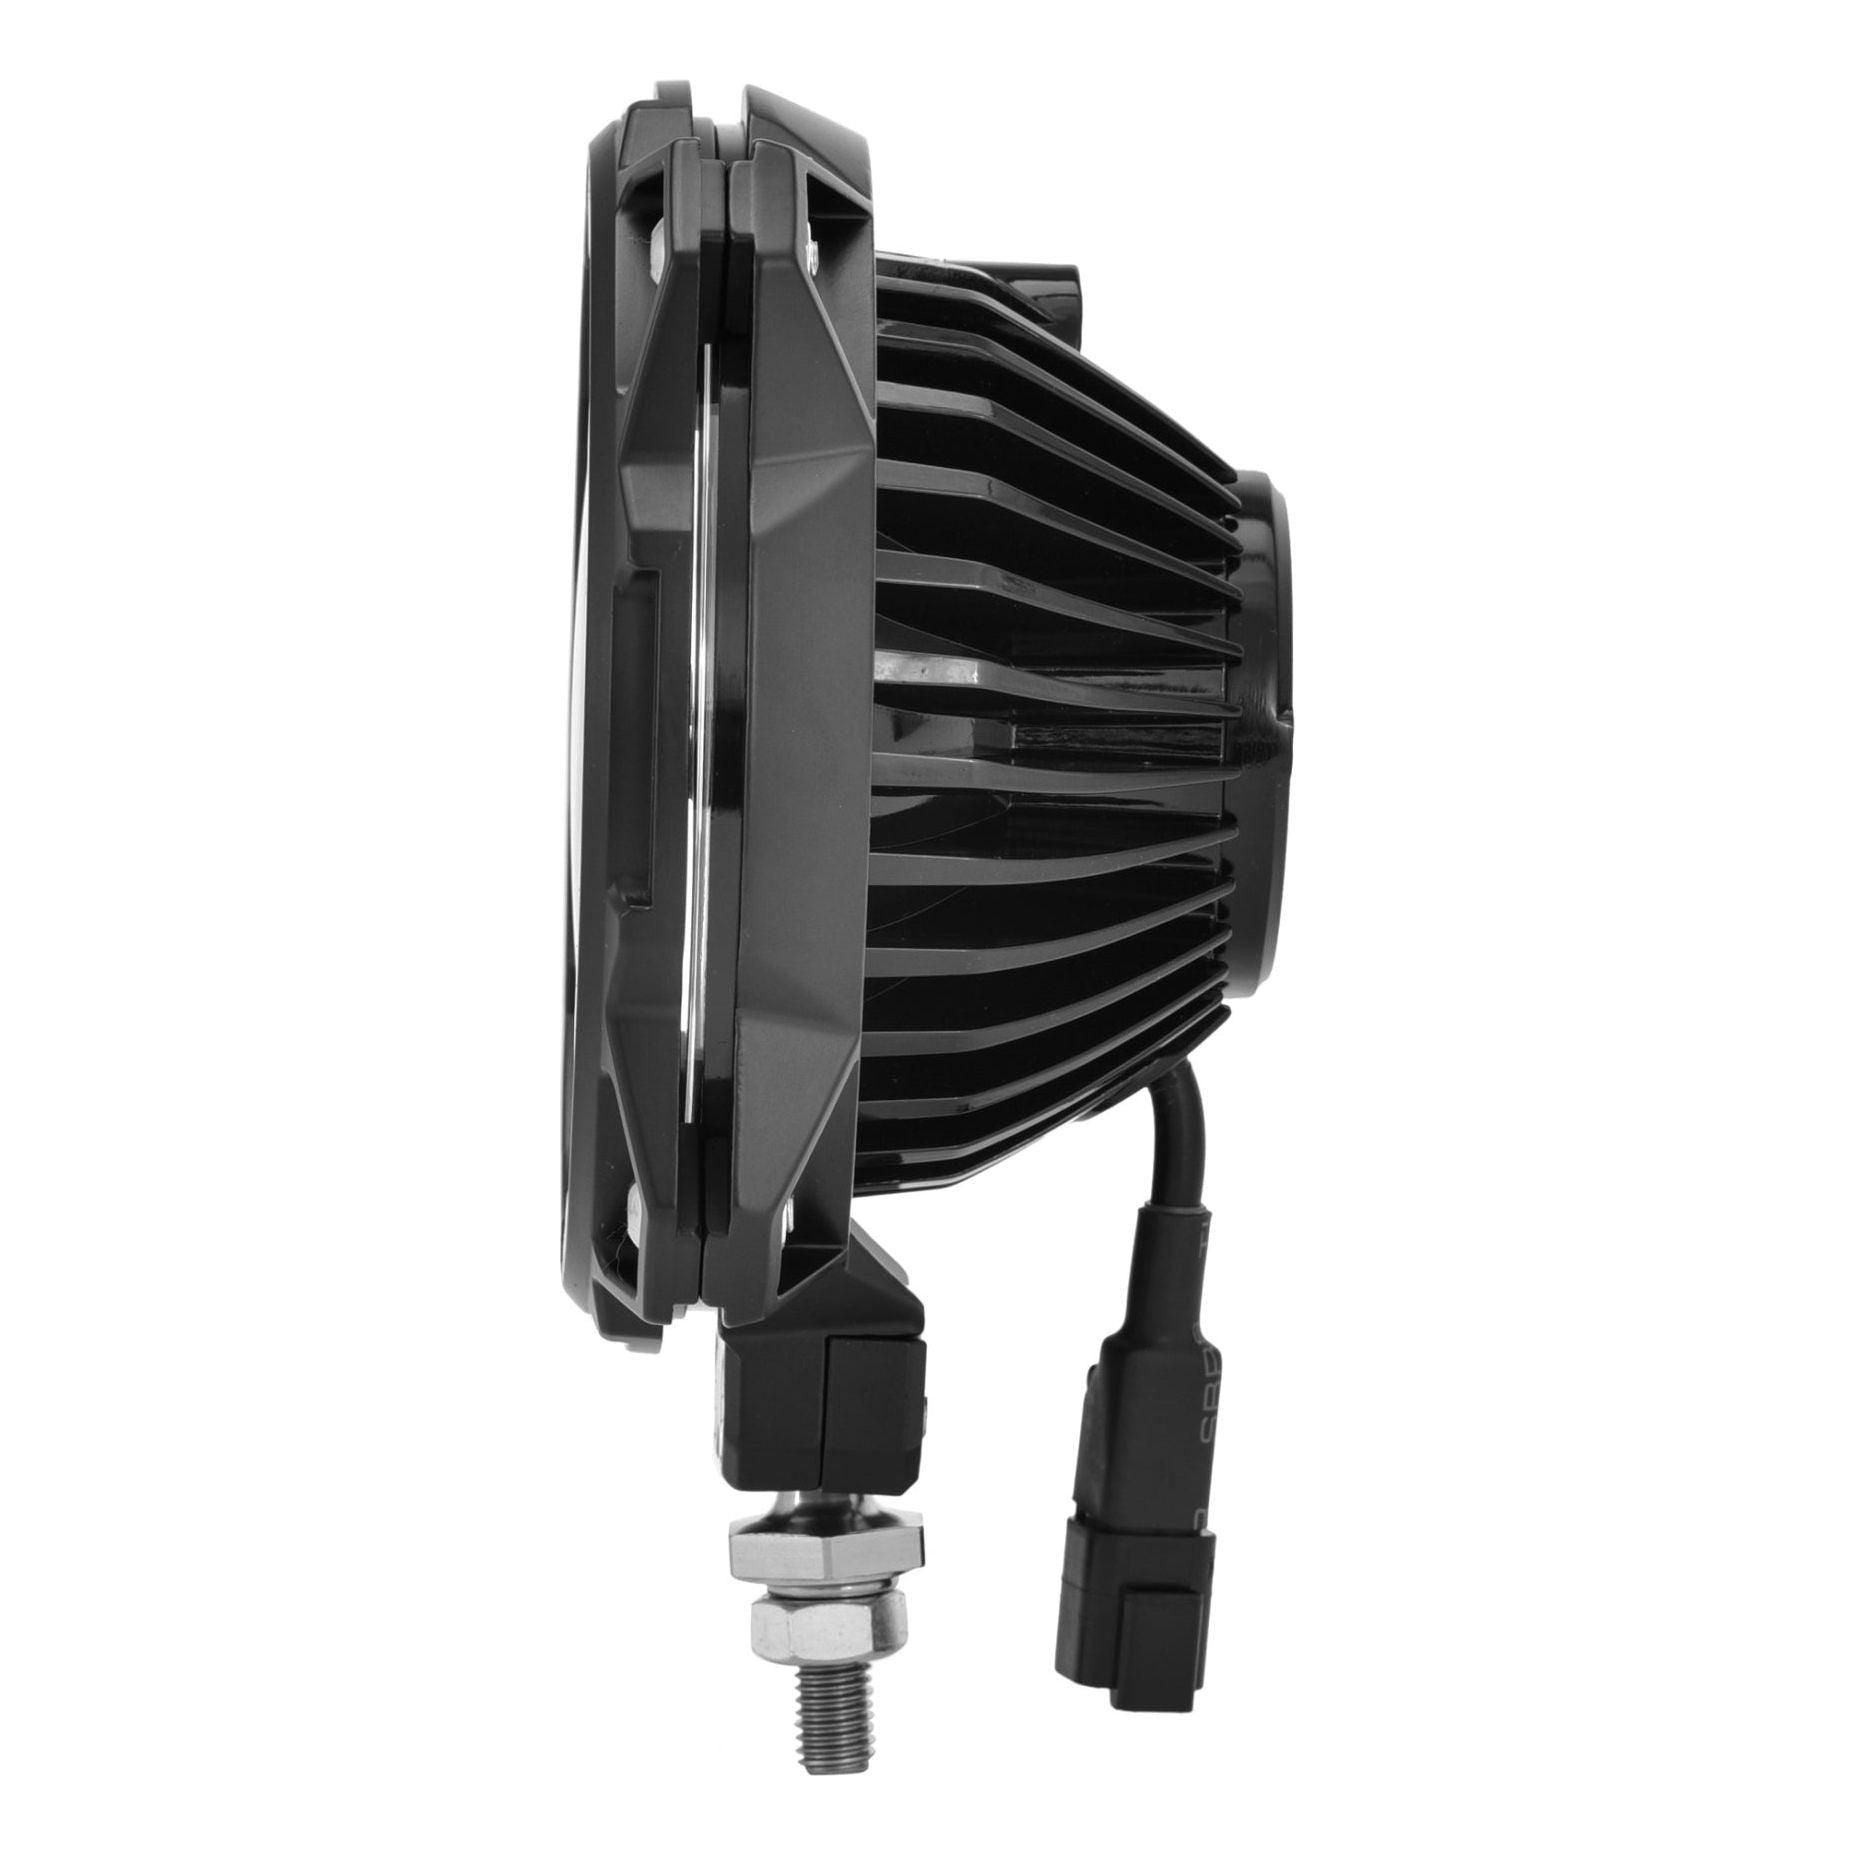 KC HiLiTES 6in. Pro6 Gravity LED Light 20w Single Mount Wide-40 Beam (Single) - SMINKpower Performance Parts KCL91304 KC HiLiTES